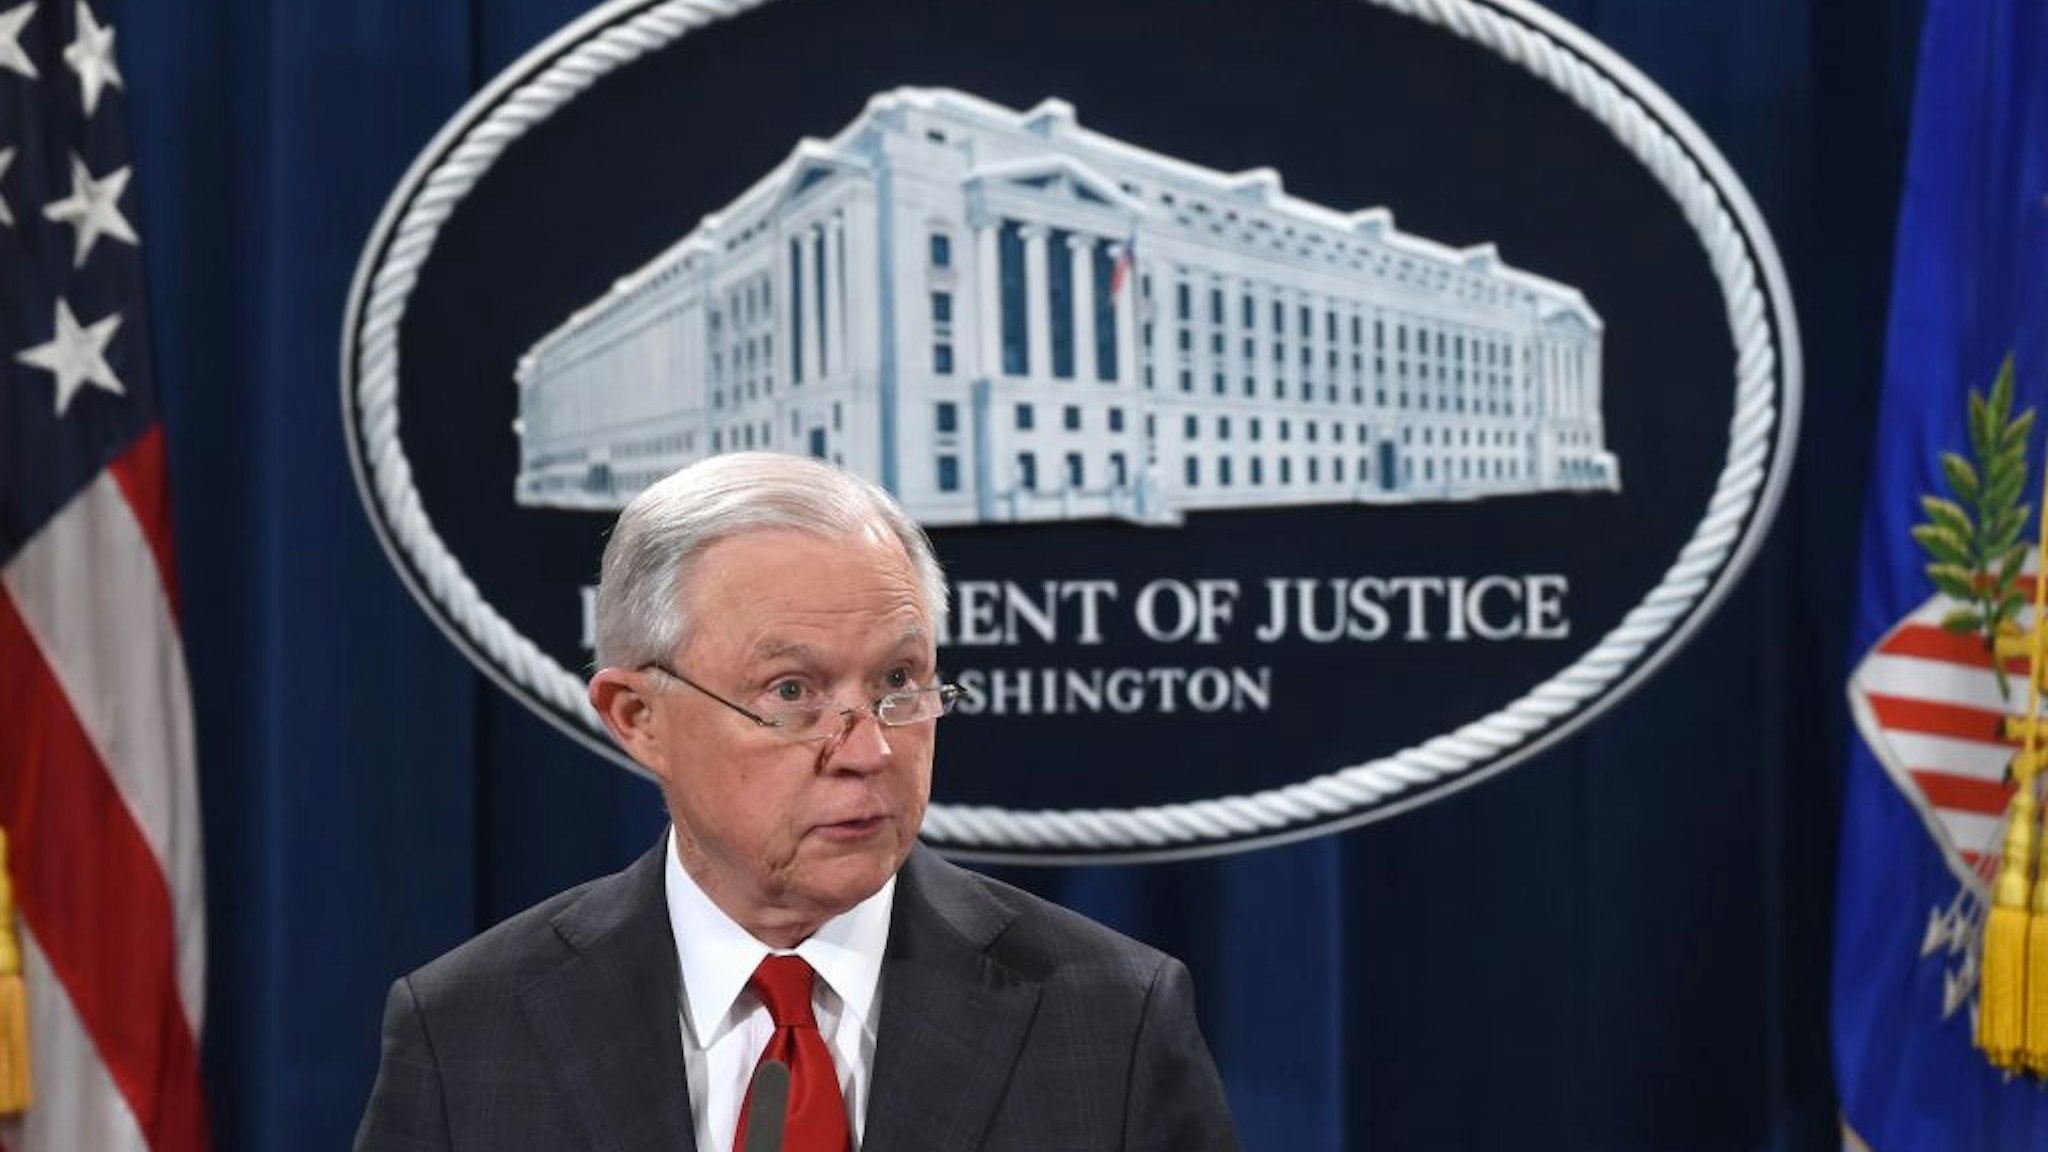 US Attorney General Jeff Sessions speaks during a press conference regarding the arrest of bombing suspect Cesar Sayoc in Florida, at the Department of Justice in Washington, DC on October 26, 2018. - The suspect has been charged with five federal crimes in connection with more than a dozen suspicious packages sent in a US mail bombing spree, Sessions said Friday.